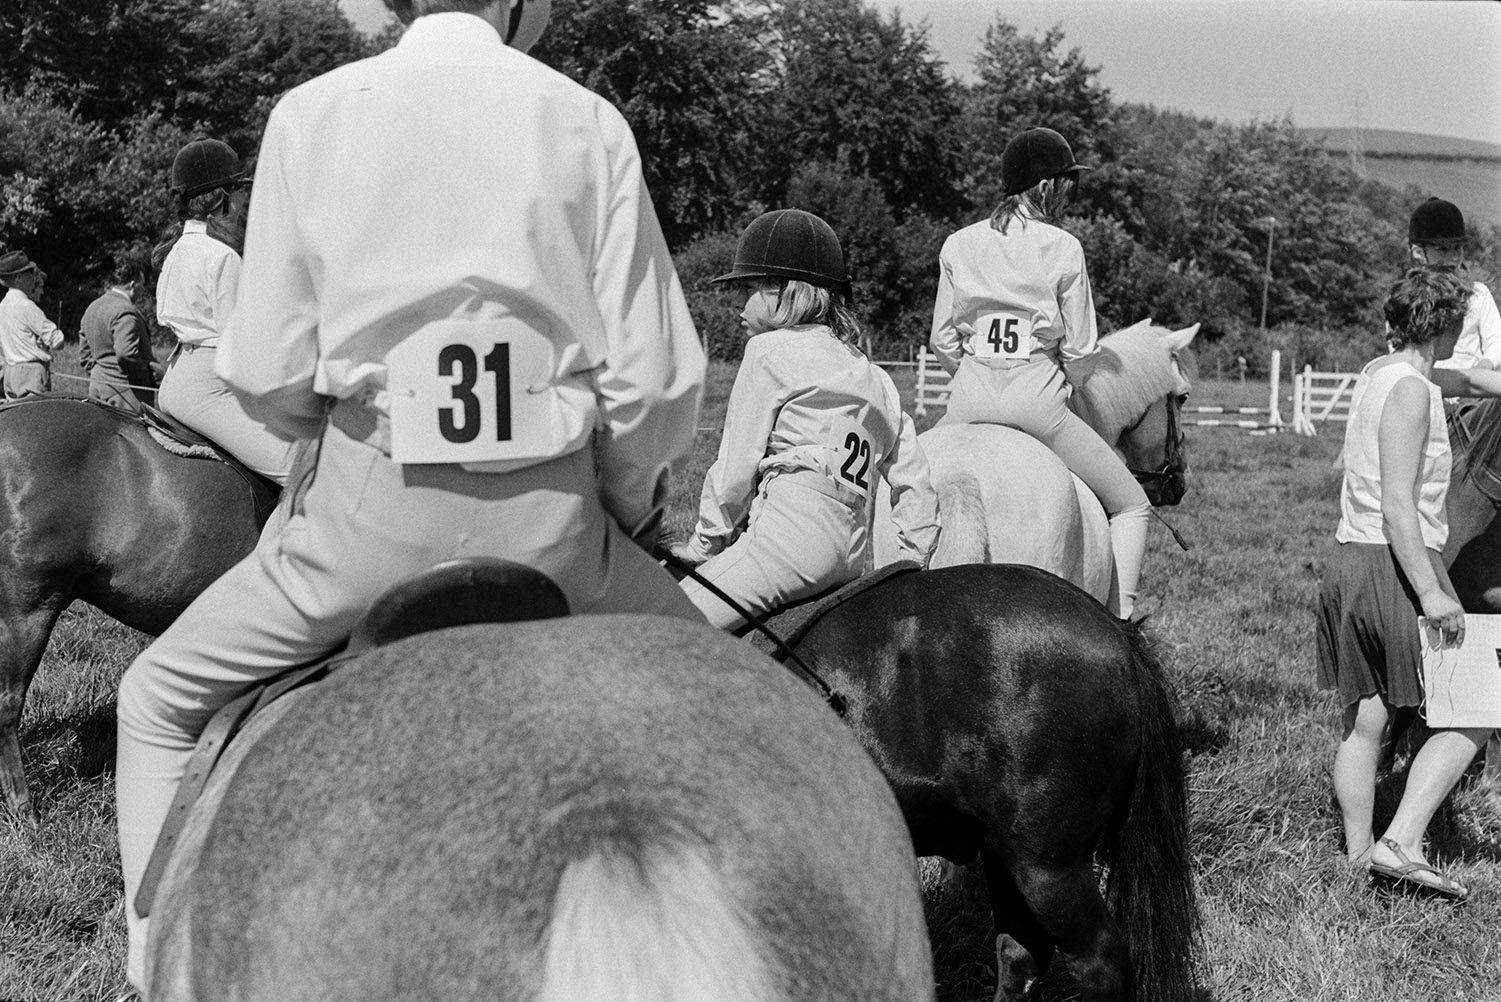 Mounted horse riders, including children, getting ready to compete in an event at the Wear Giffard gymkhana.